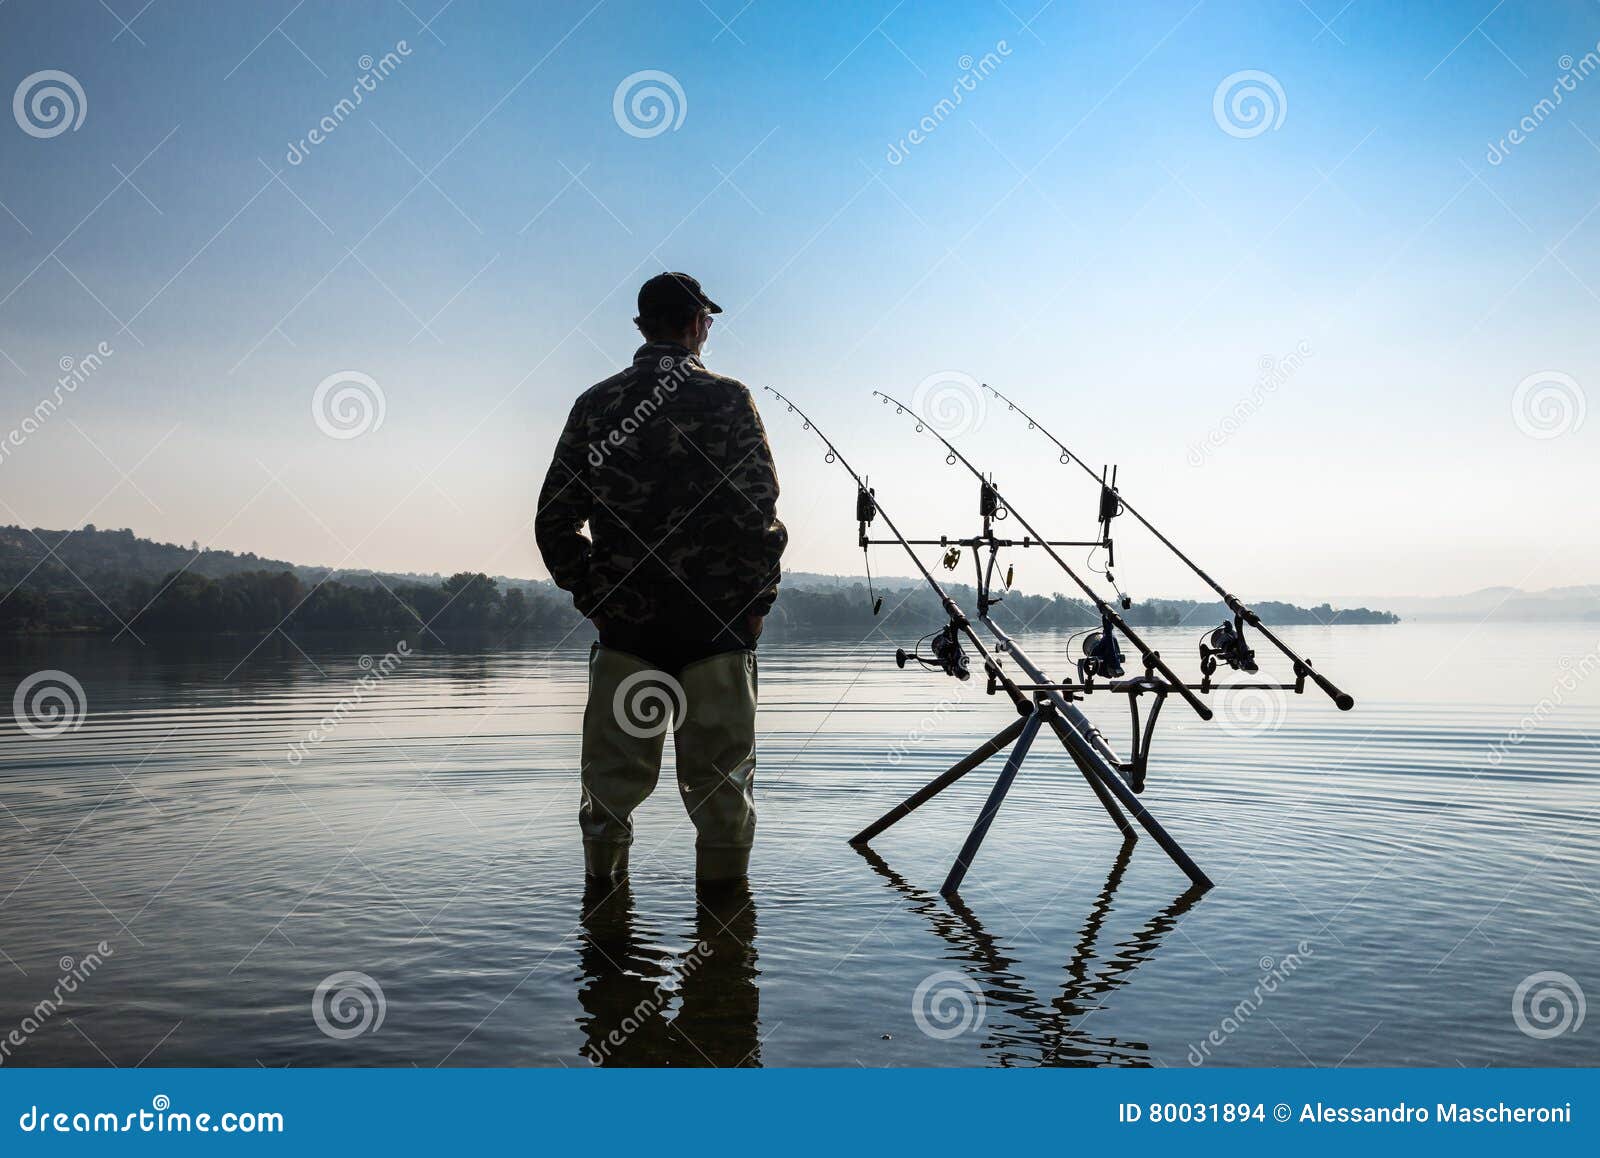 https://thumbs.dreamstime.com/z/fishing-adventures-fisherman-waiting-to-catch-fish-carp-fishing-technique-particular-equipment-used-rod-pod-bite-alarms-80031894.jpg